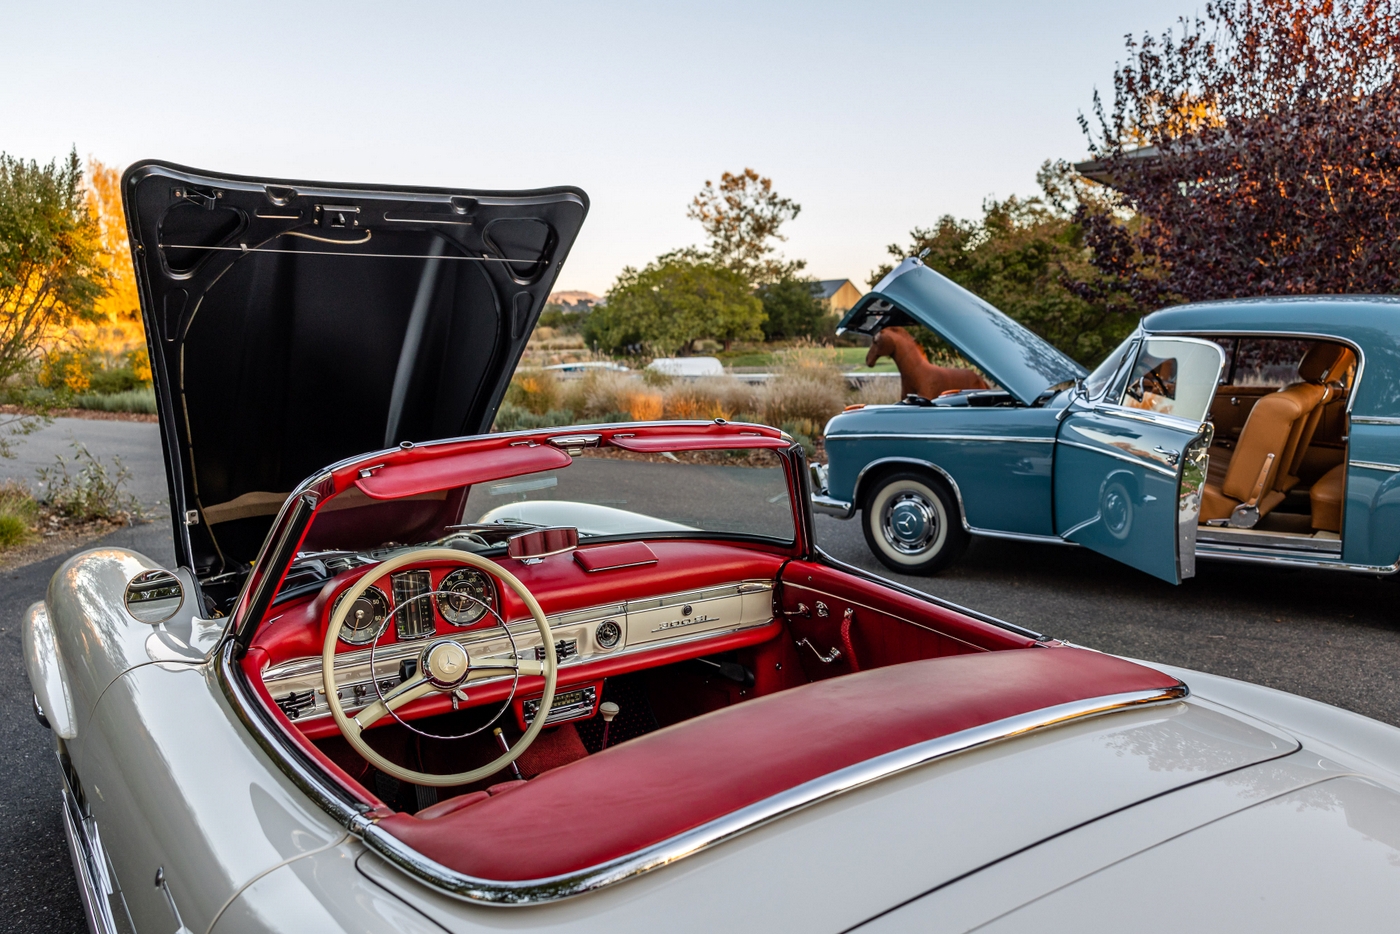 1959 Mercedes-Benz 220 S Coupe and 1963 Mercedes-Benz 300SL Roadster